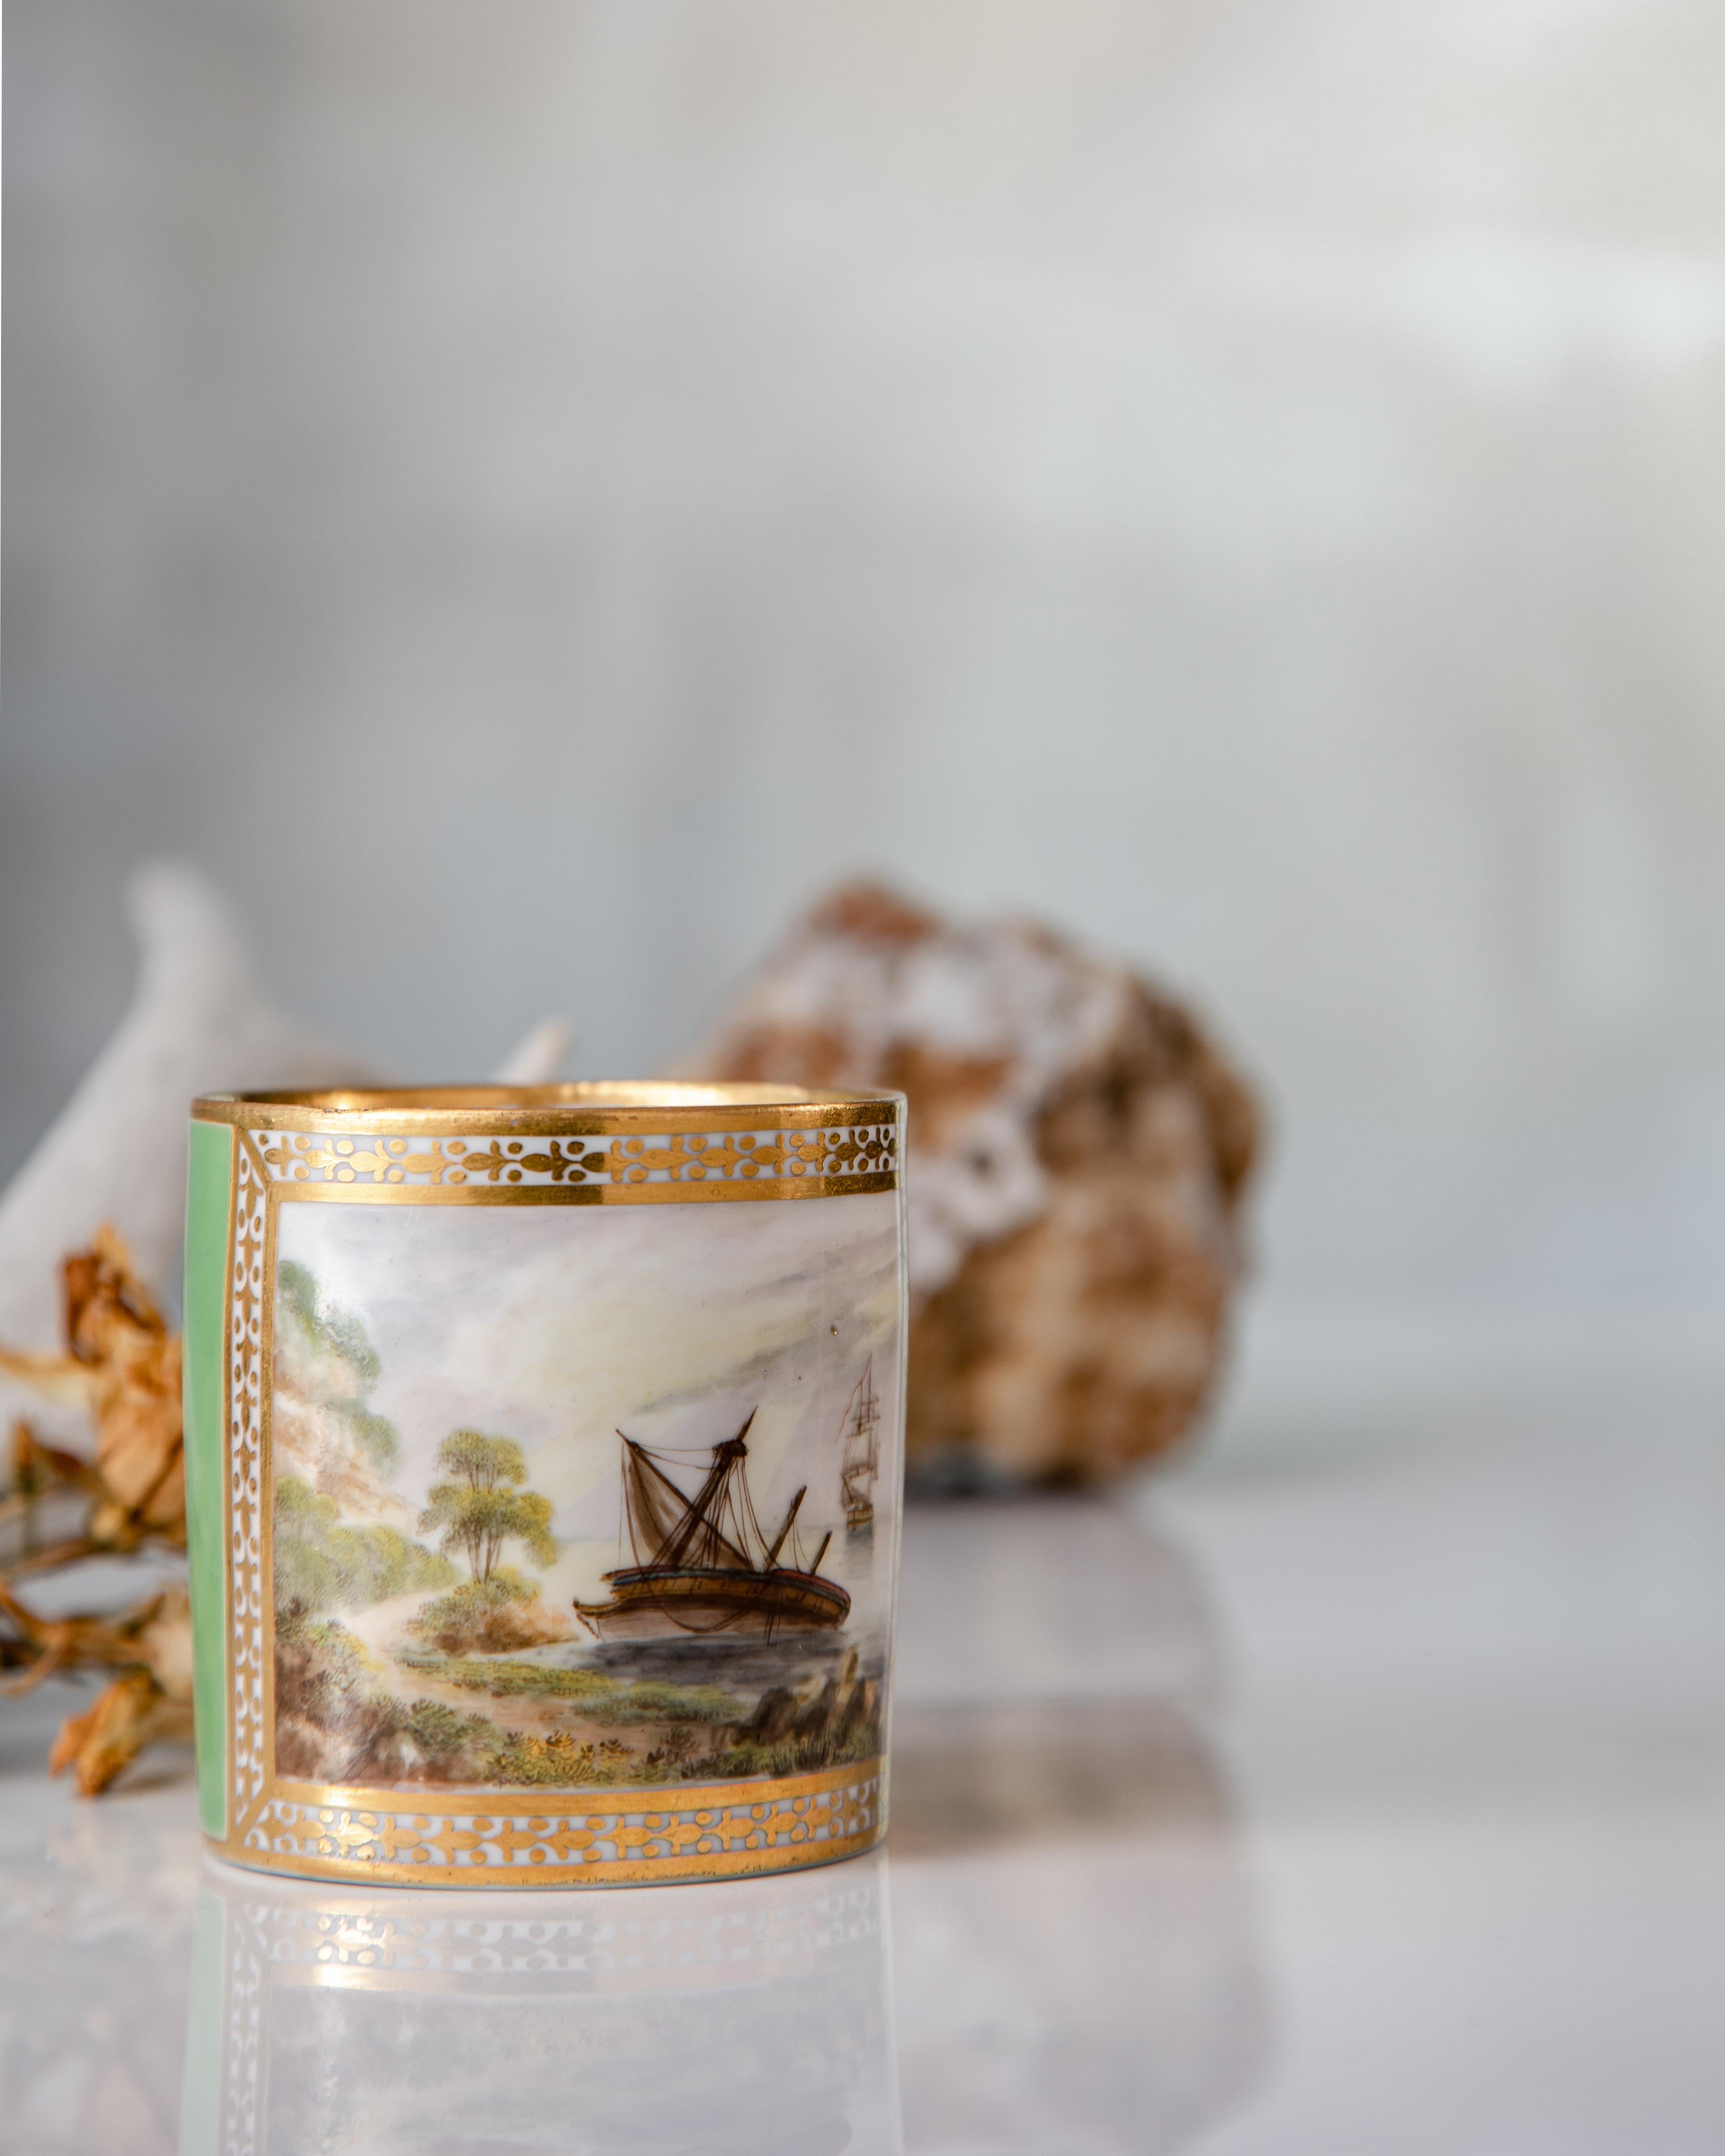 A green-ground porcelain coffee can made by the Derby Porcelain Factory circa 1795.

This green-ground coffee can is a fine example of early Derby porcelain. The shipwreck scene, titled on the bottom “A Shipwreck after a Storm” in hand-written